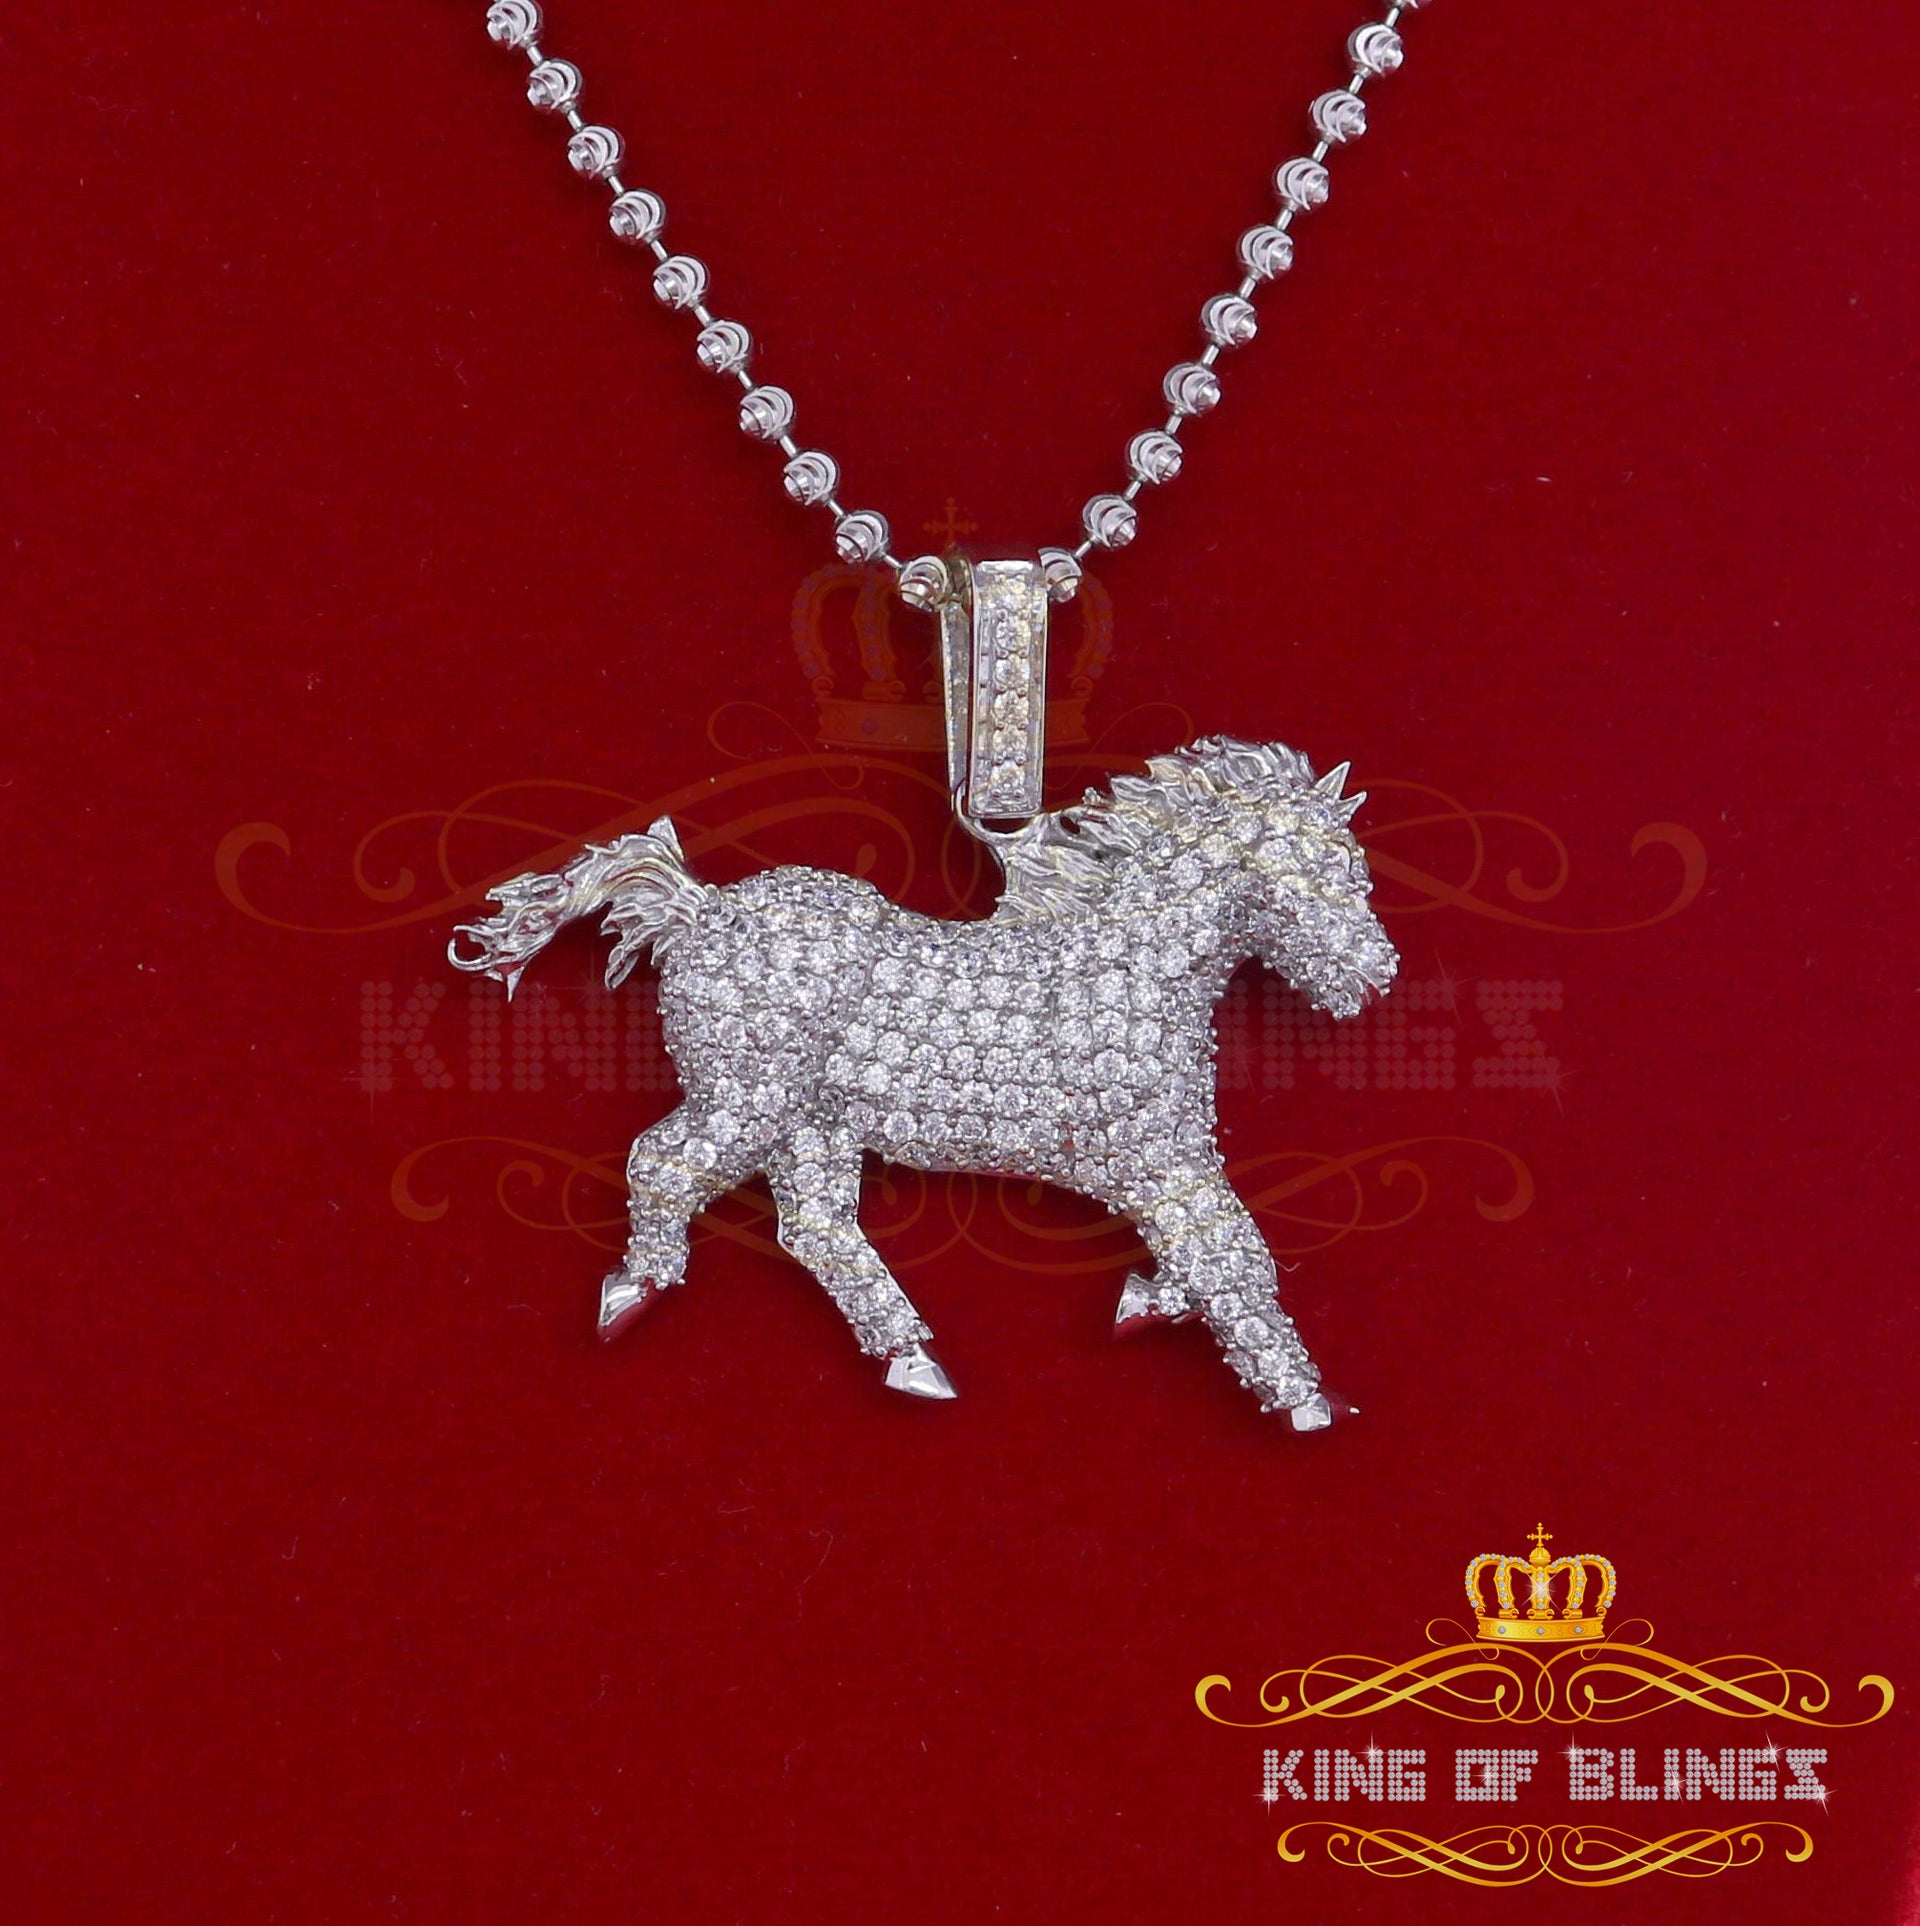 White Special 925 Sterling Silver Horse Shape Pendant with 8.30ct Cubic Zirconia KING OF BLINGS